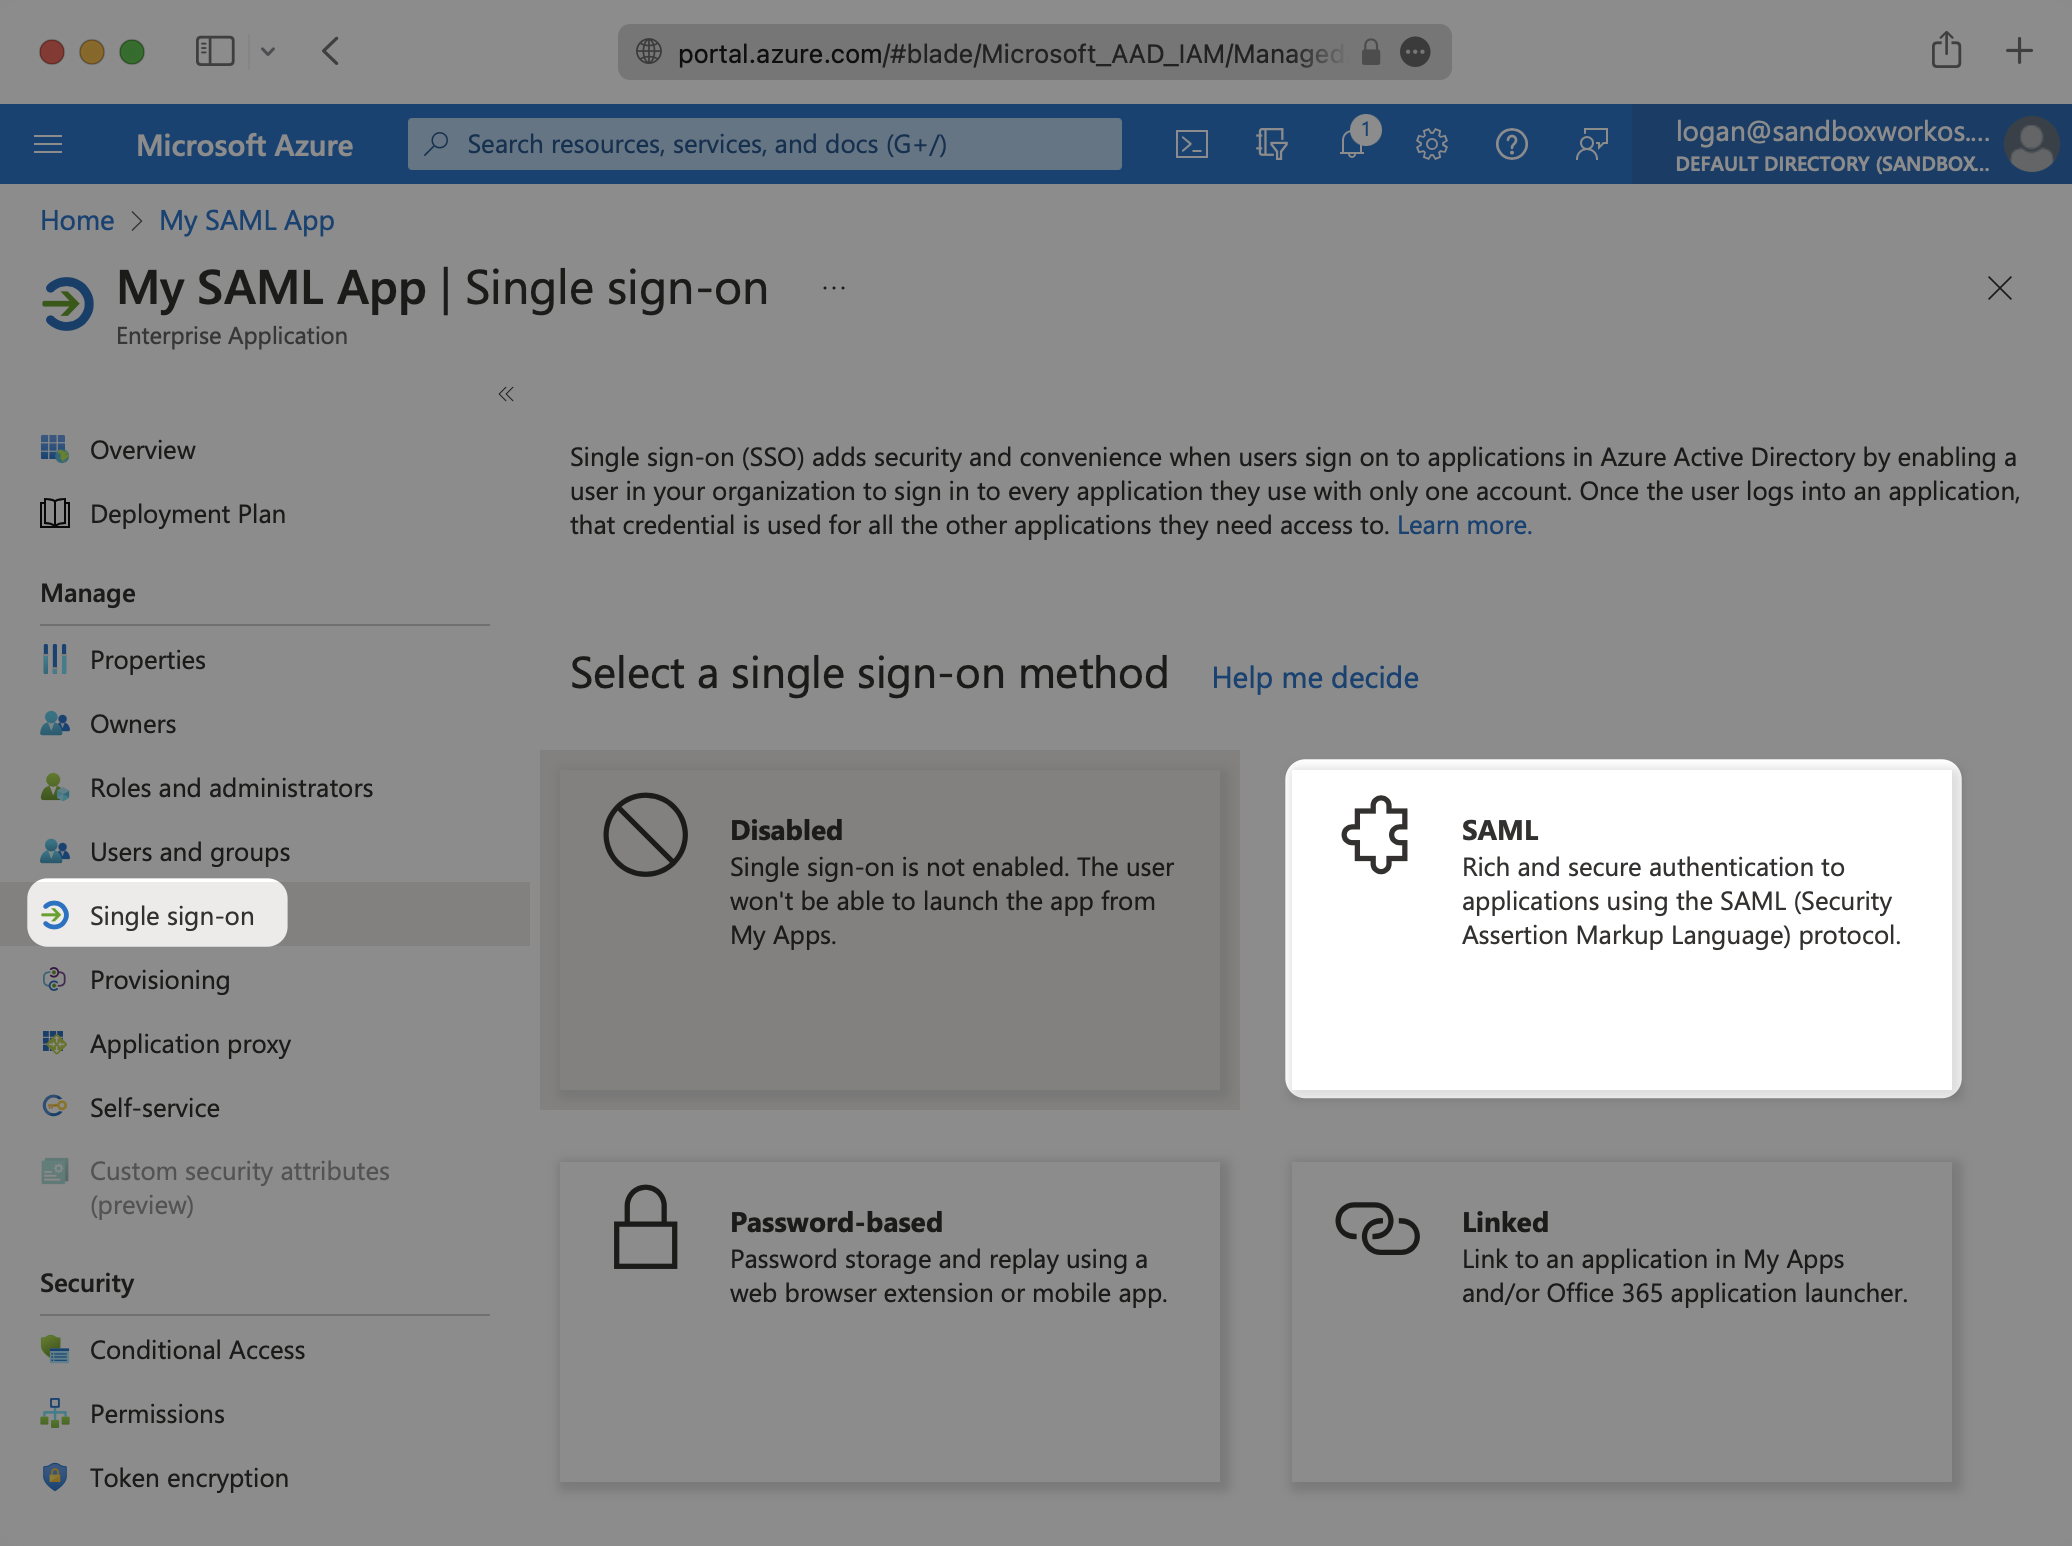 A screenshot showing how to select "SAML" as the single sign-on method of the Azure application in the Azure dashboard.